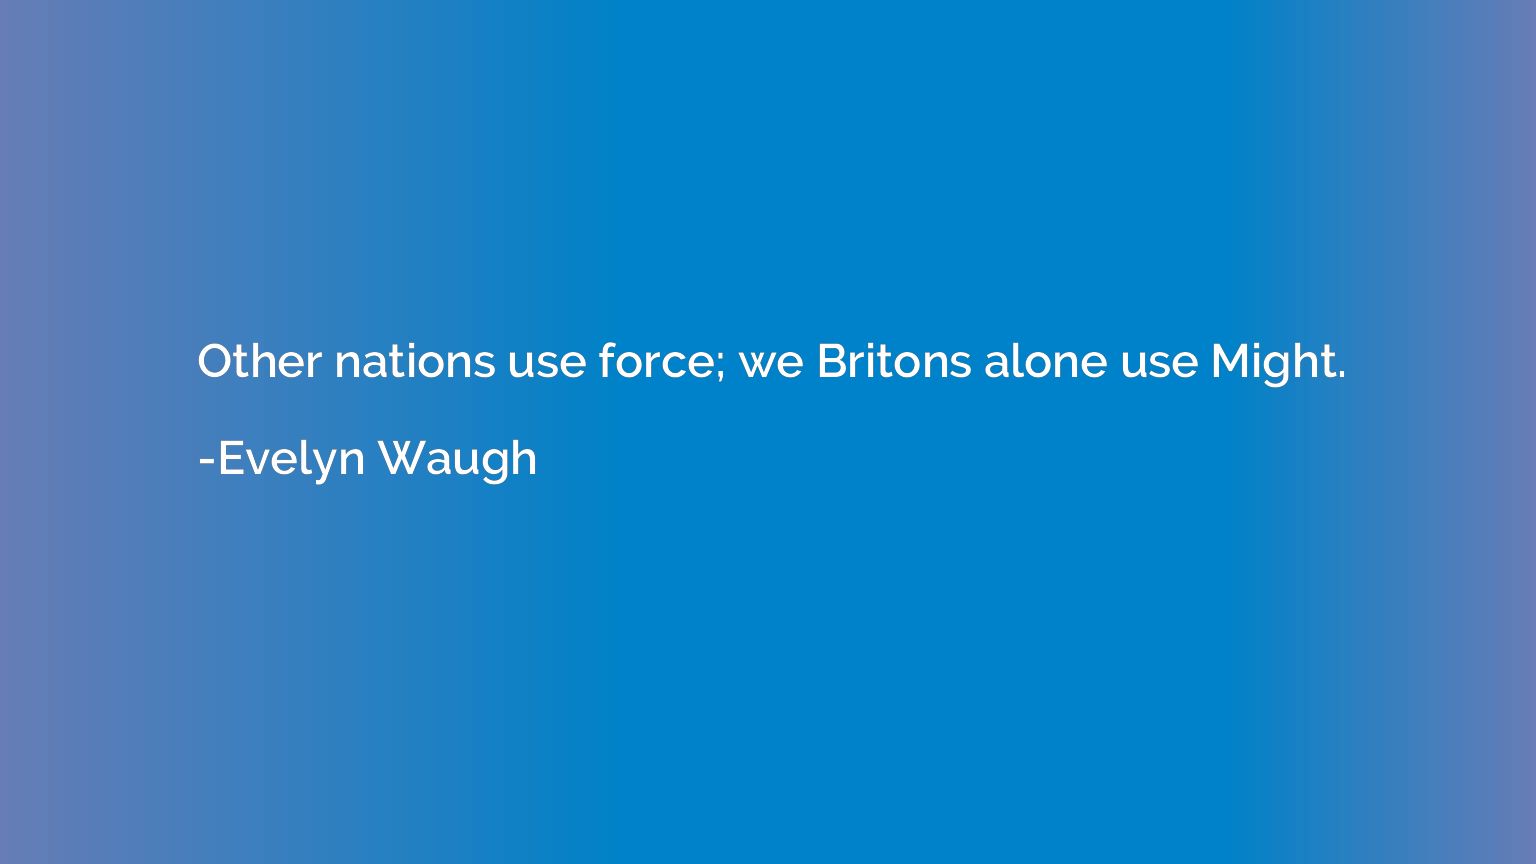 Other nations use force; we Britons alone use Might.